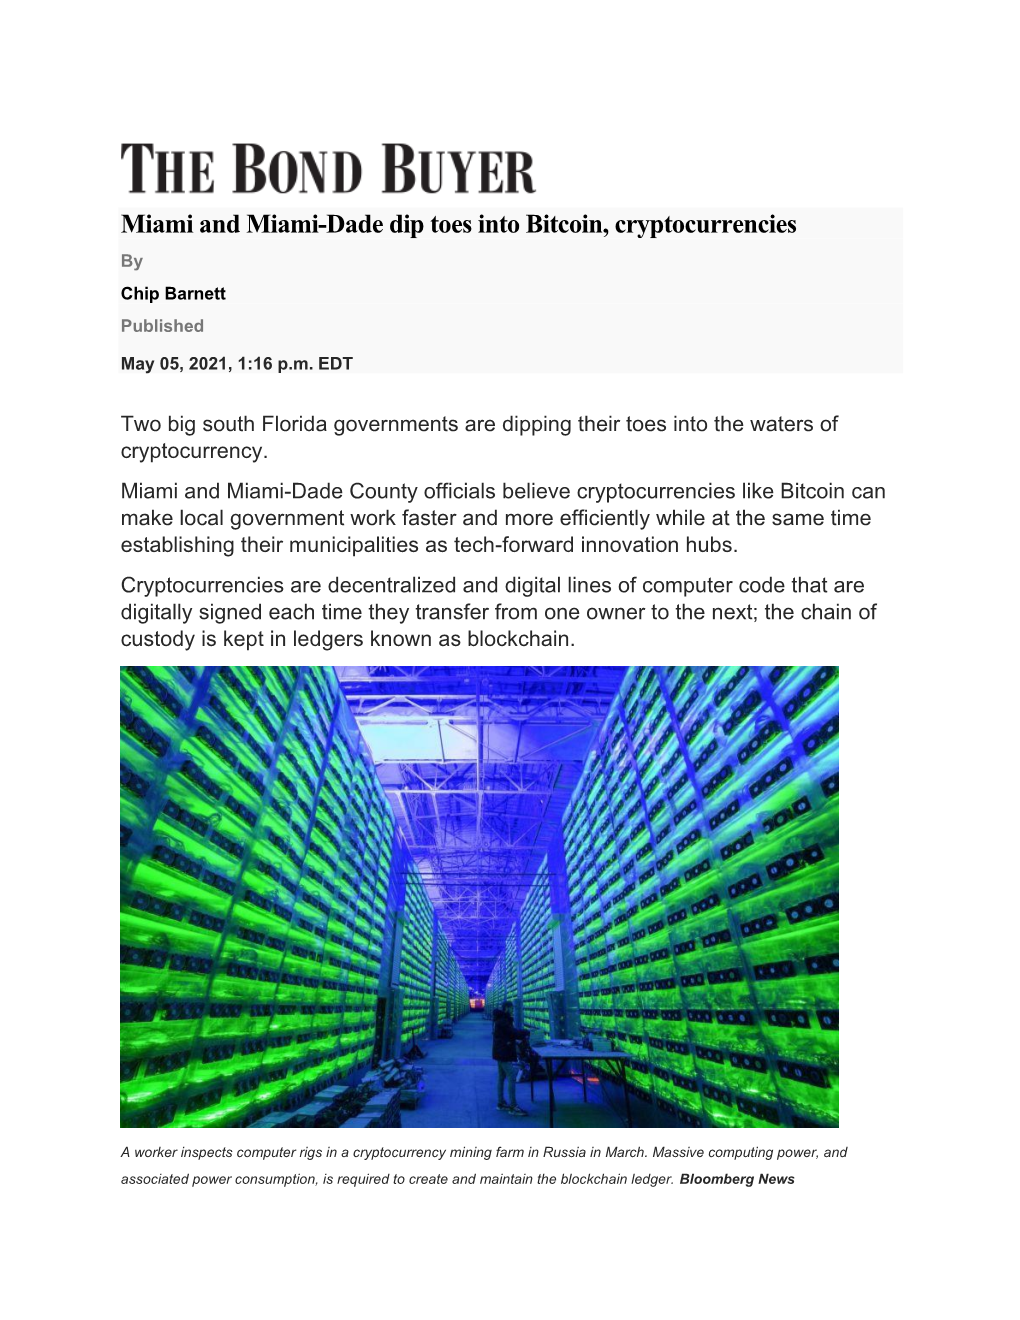 Miami and Miami-Dade Dip Toes Into Bitcoin, Cryptocurrencies by Chip Barnett Published